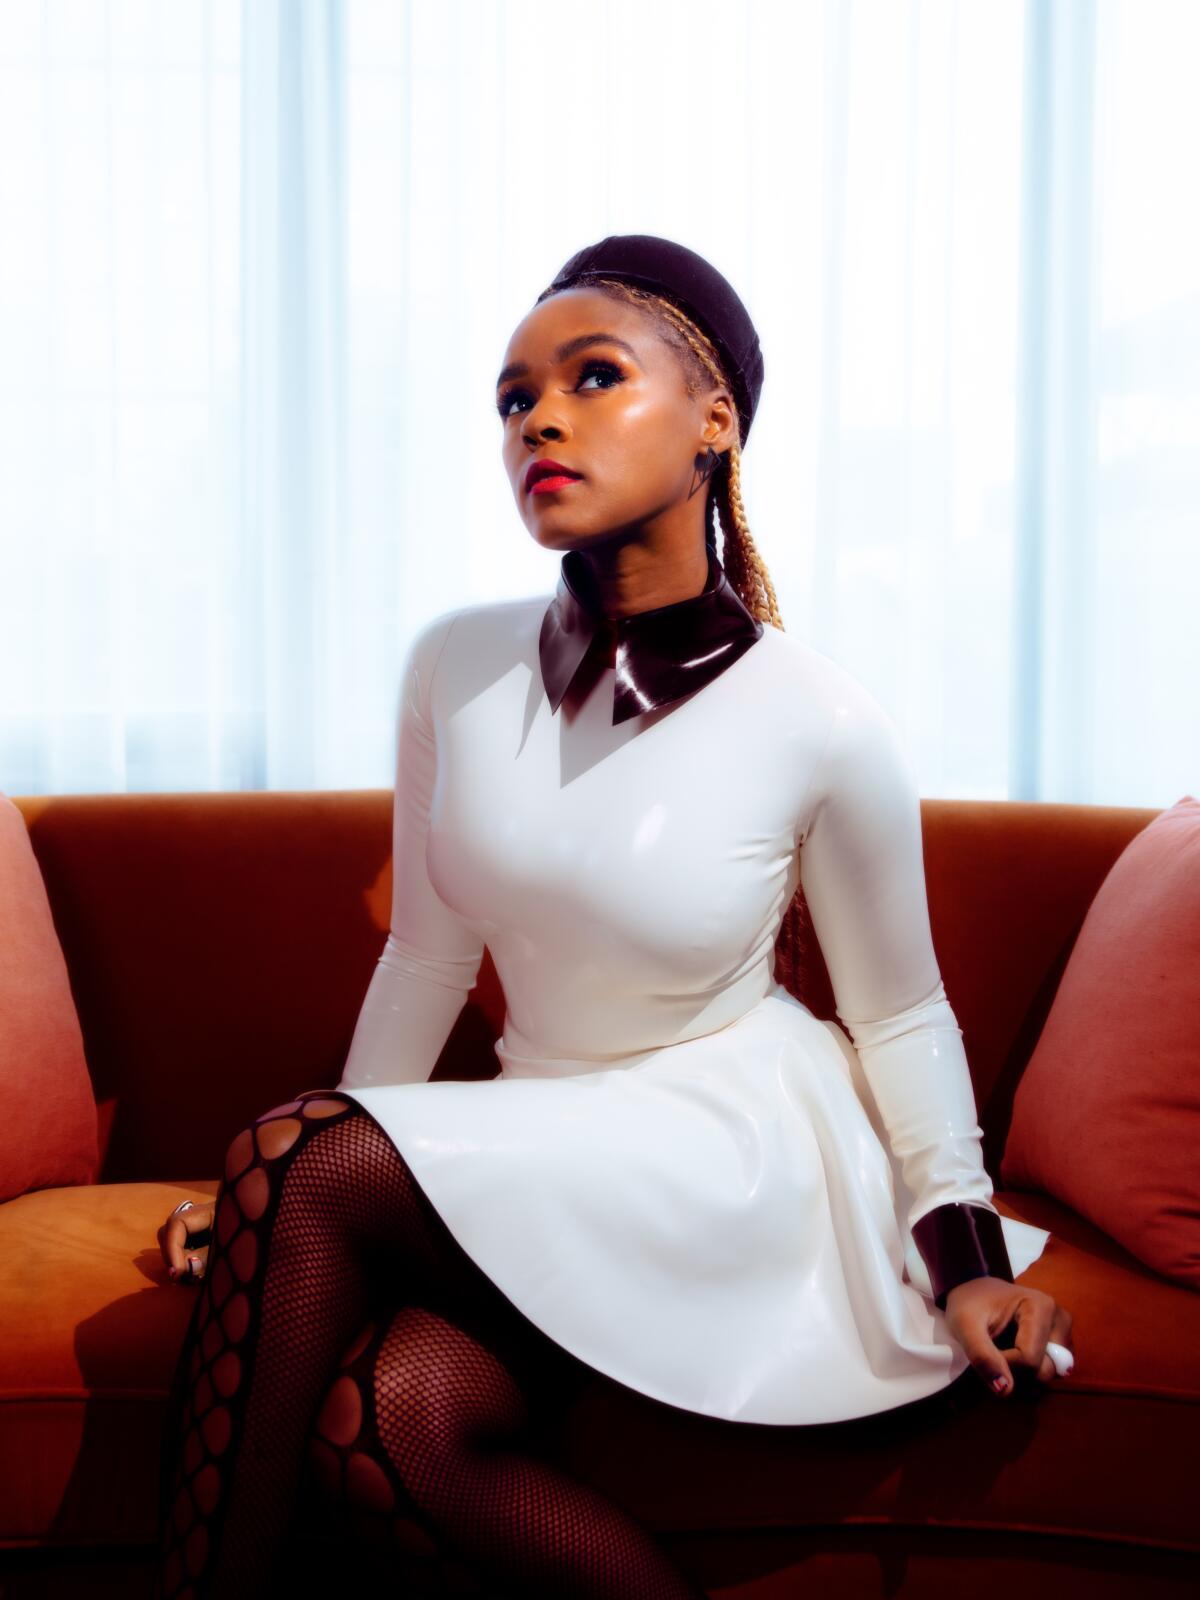 Janelle Monáe poses for a photo in a white dress with a black collar at the Pendry hotel in New York.